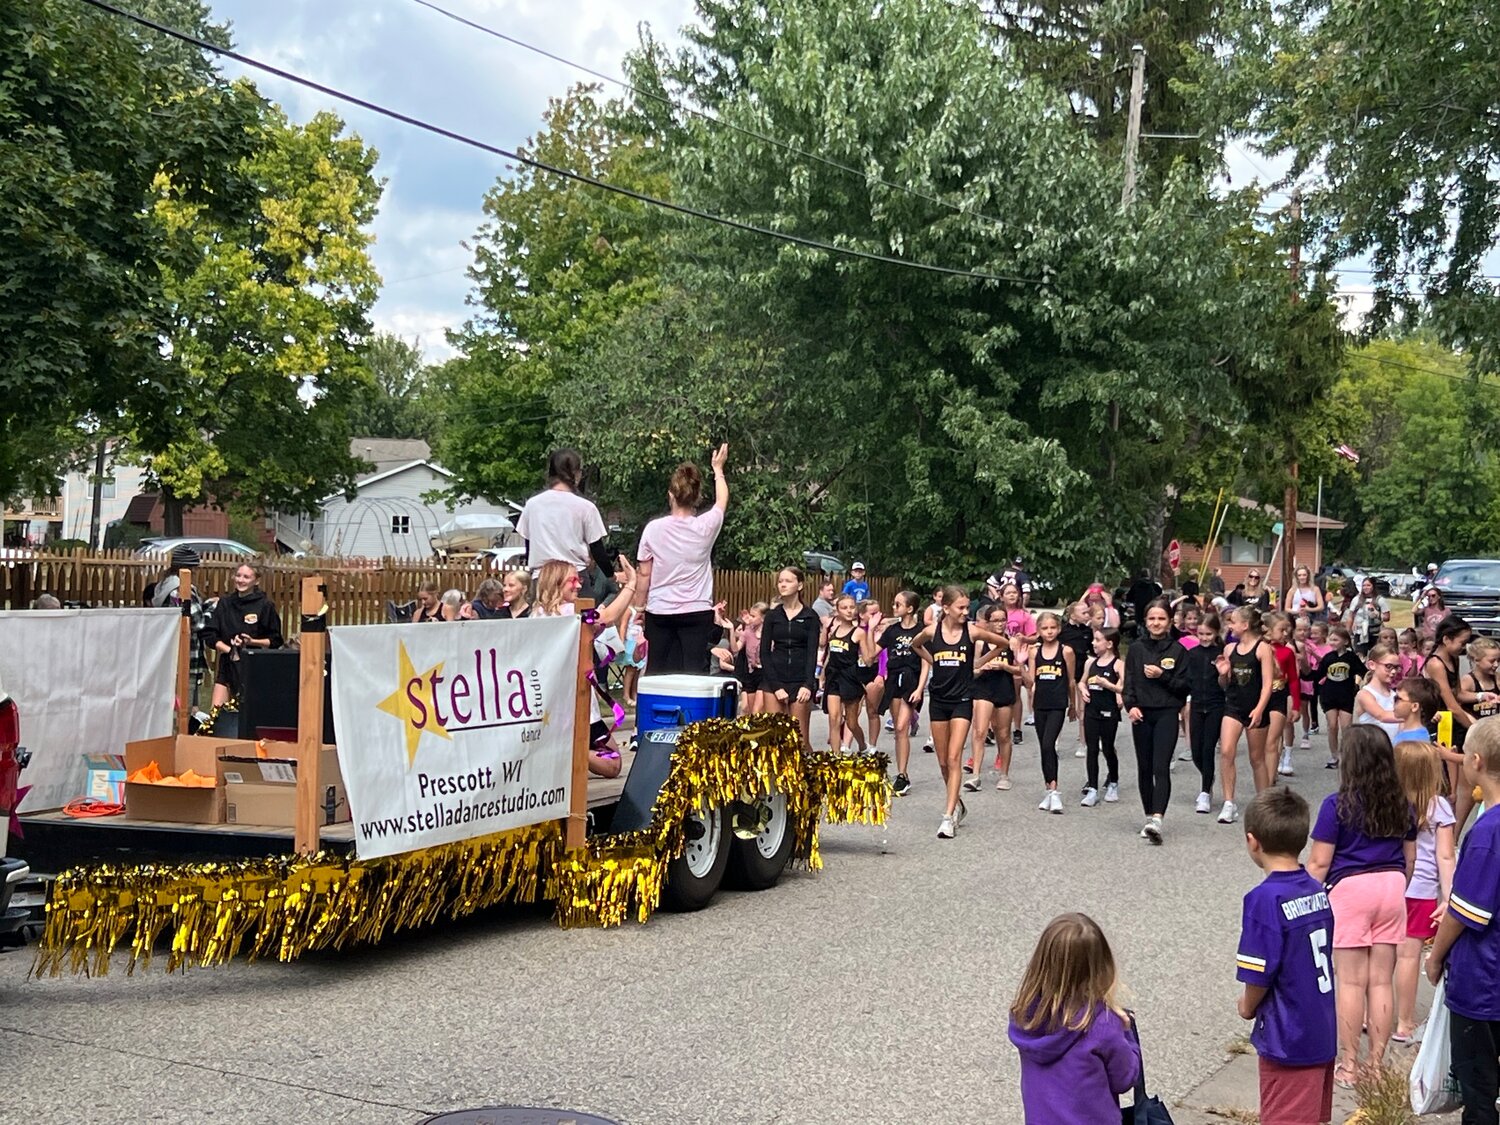 Dancers from the Stella Dance Studio performed along the Prescott Daze Parade route, showing off their routines to applause from the crowd.